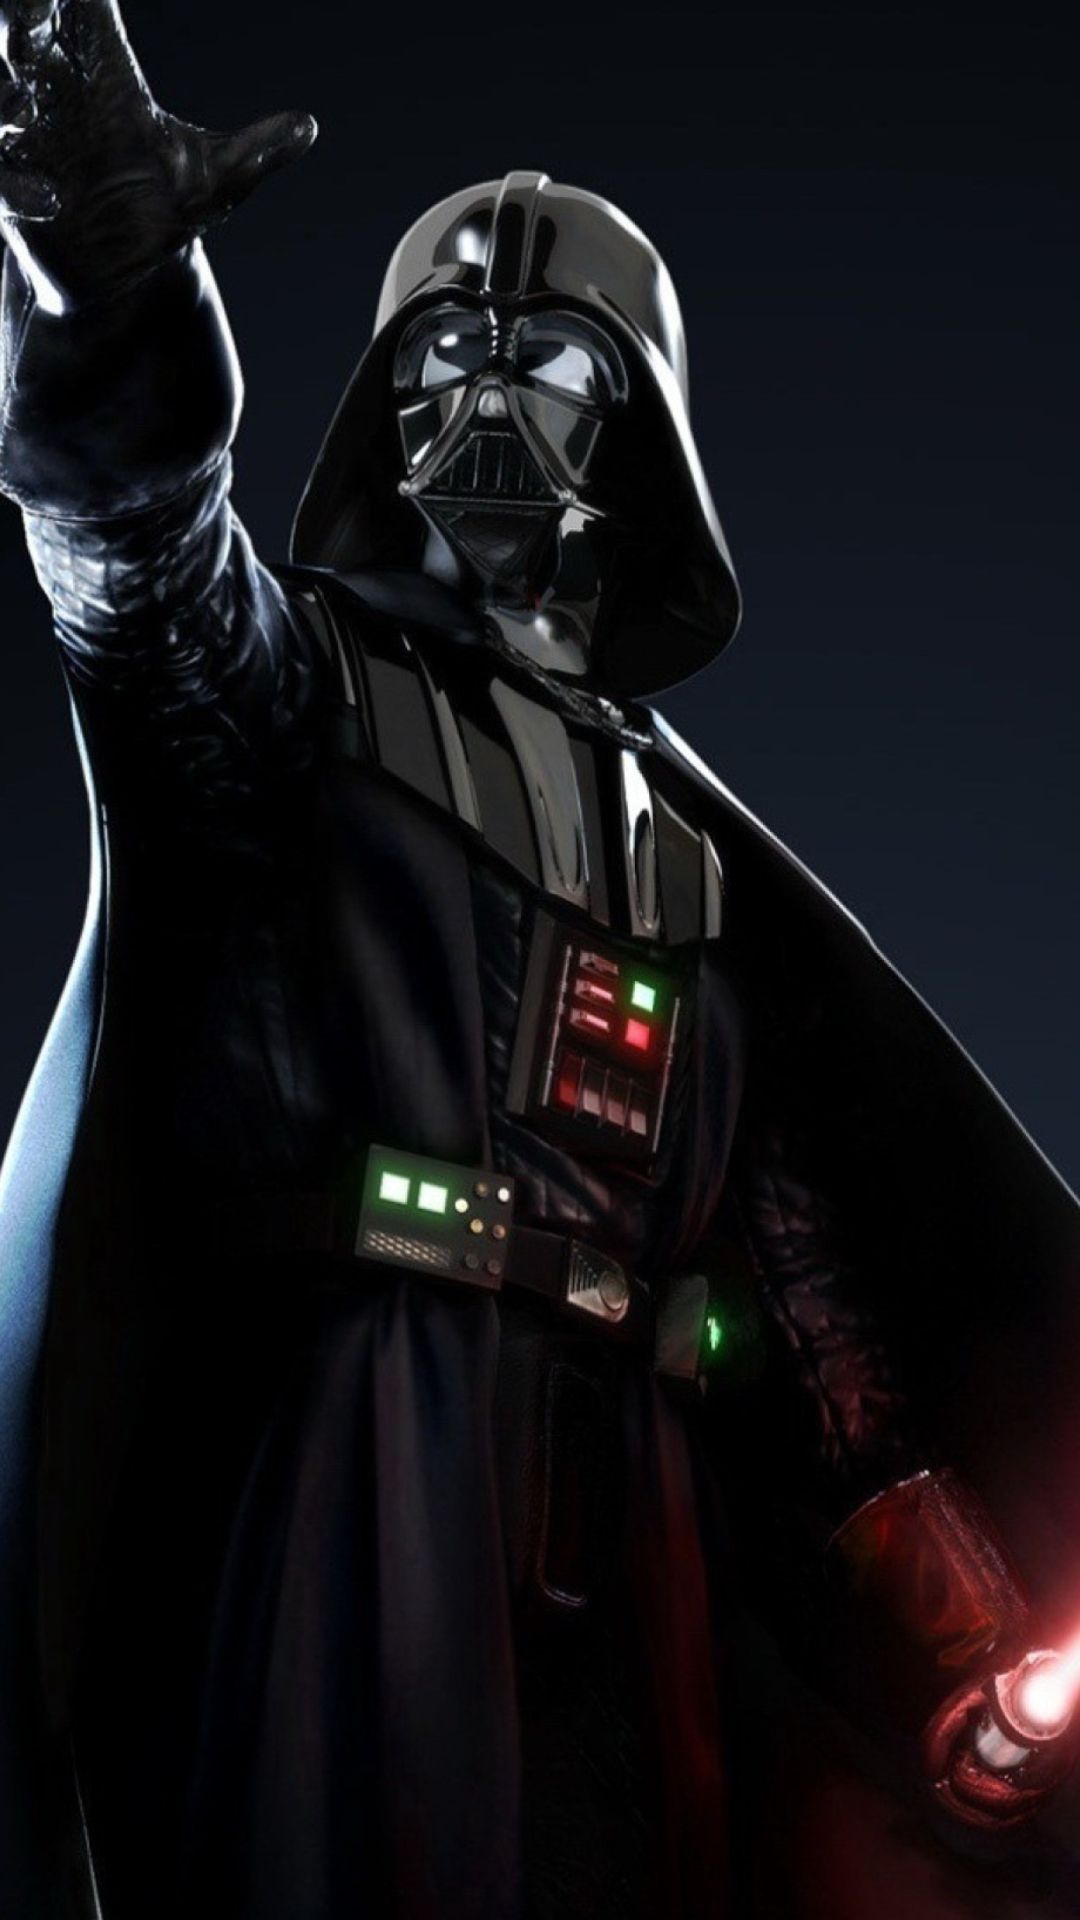 Darth Vader Wallpapers For Iphone 7, Iphone 7 Plus, - Darth Vader Wallpaper Iphone - HD Wallpaper 